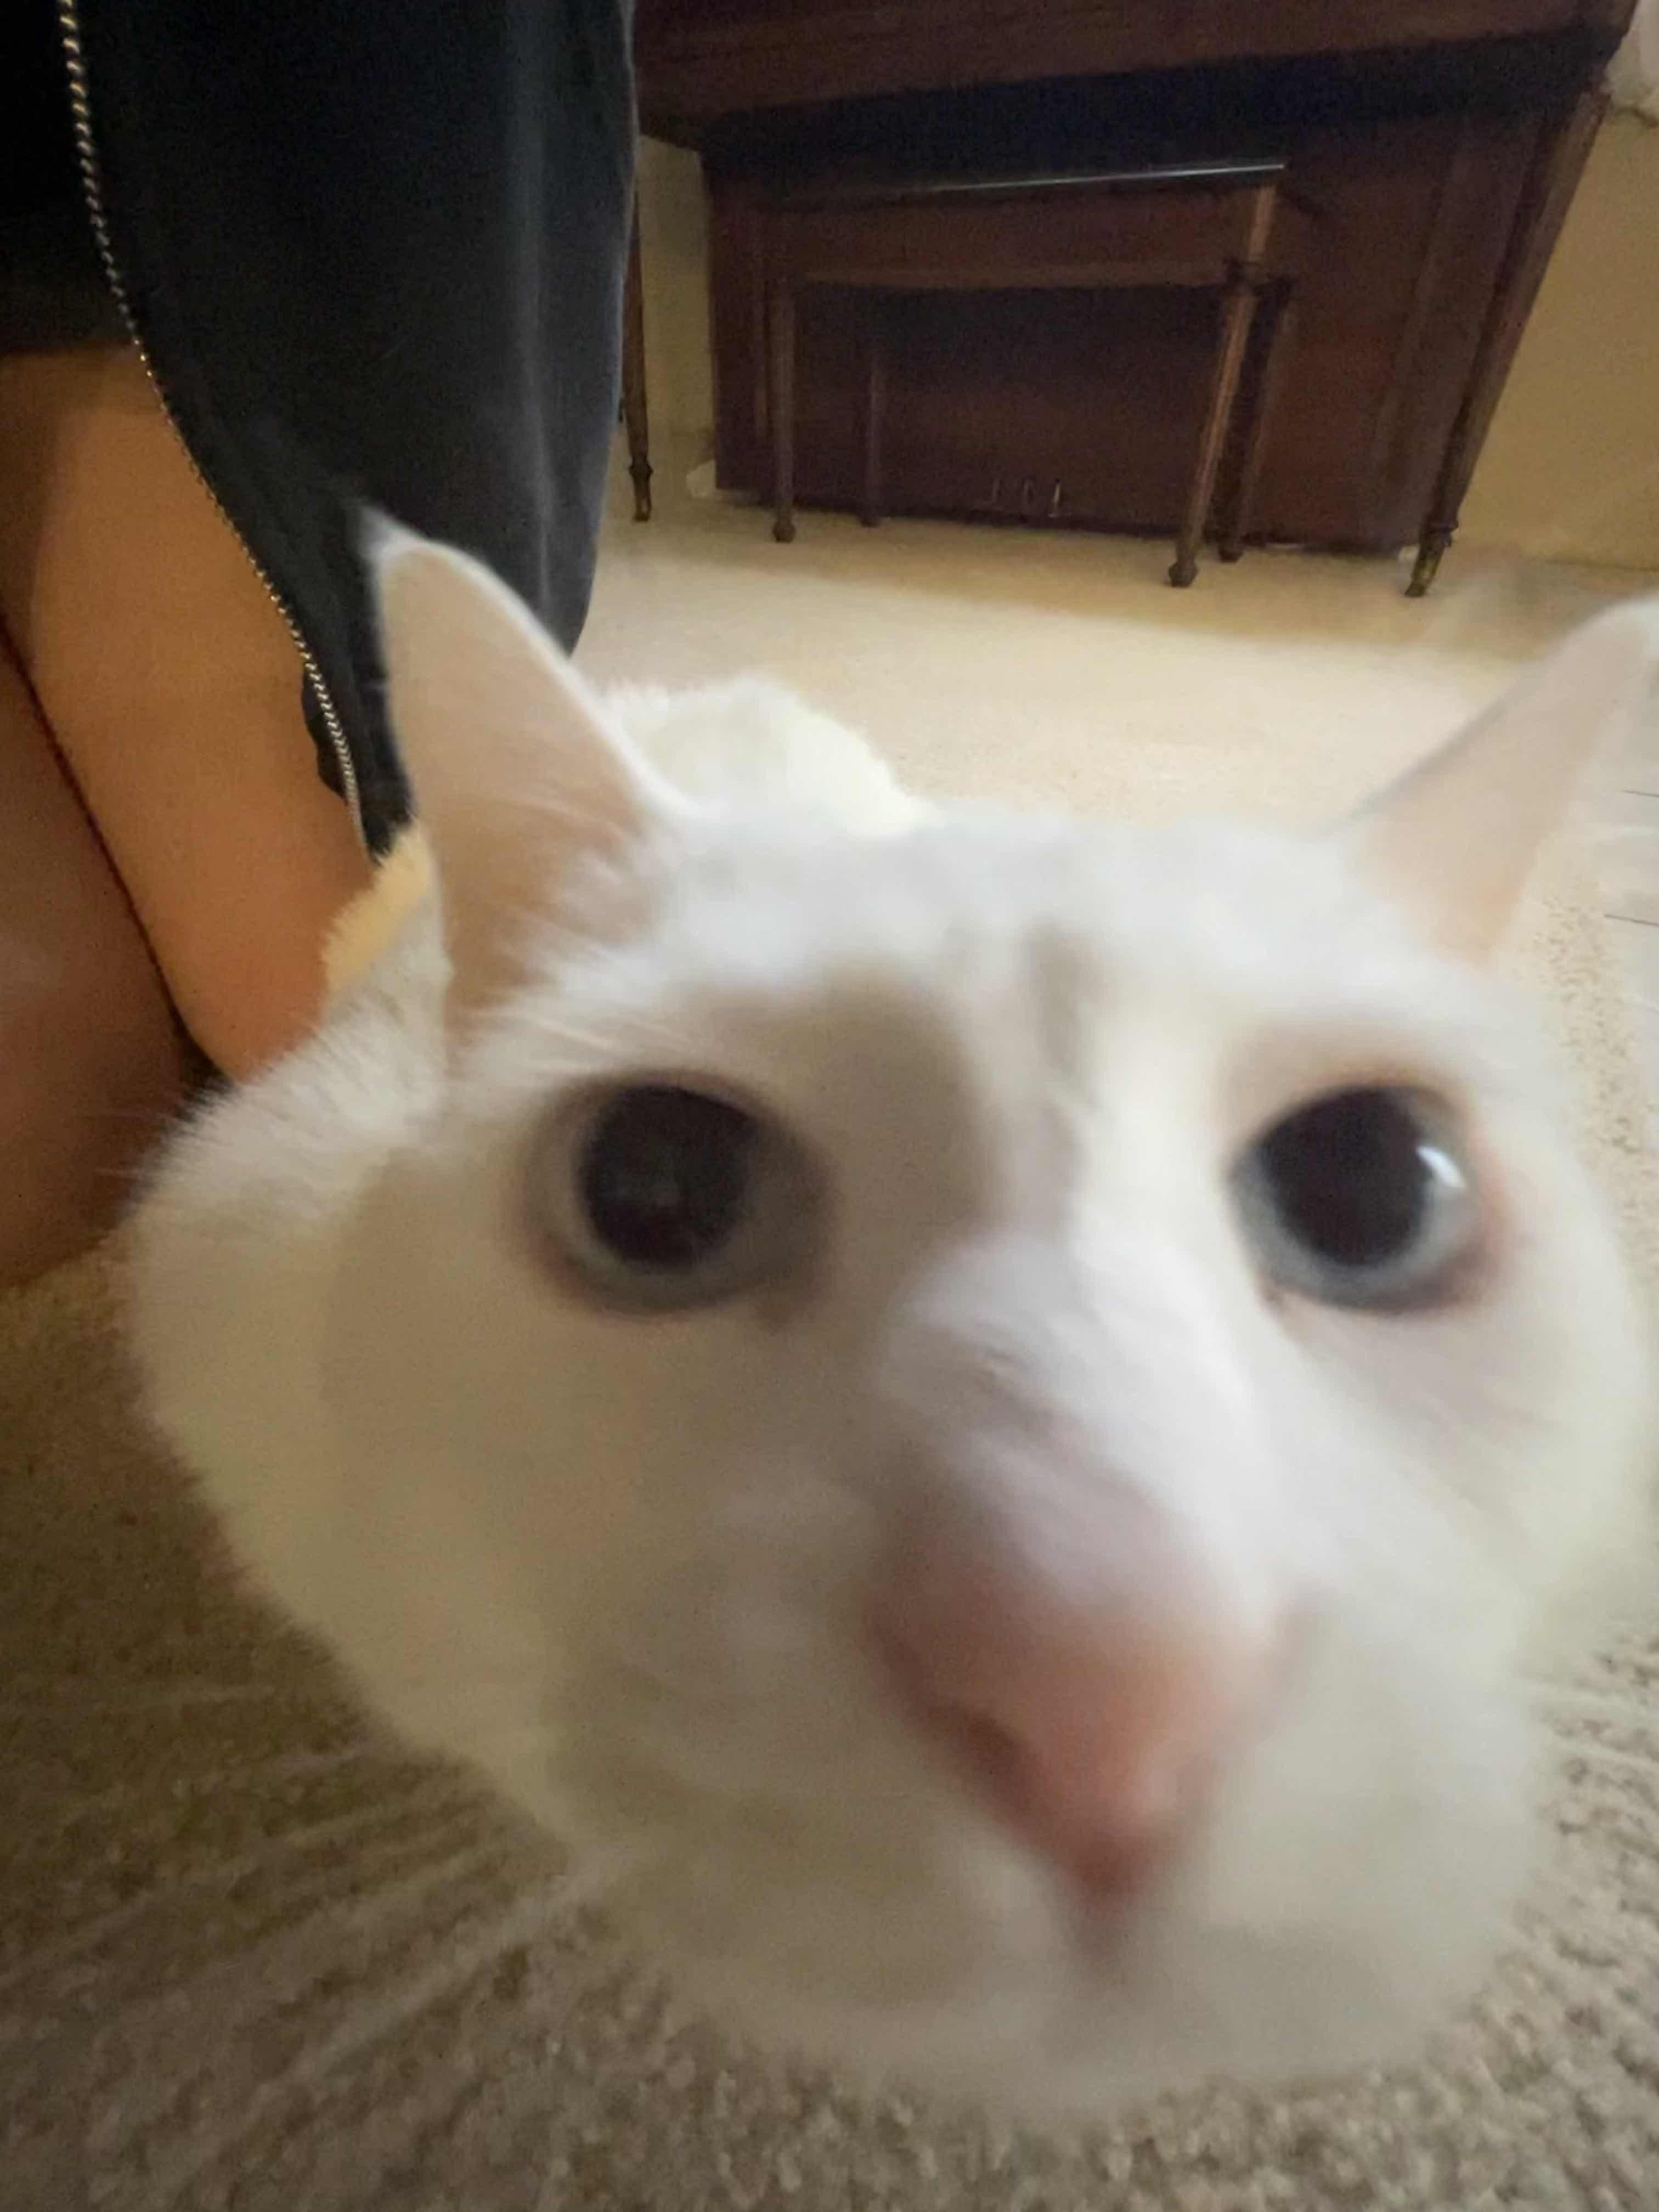 a cat leaning extremely close into the camera, with his eyes pointed at the camera.